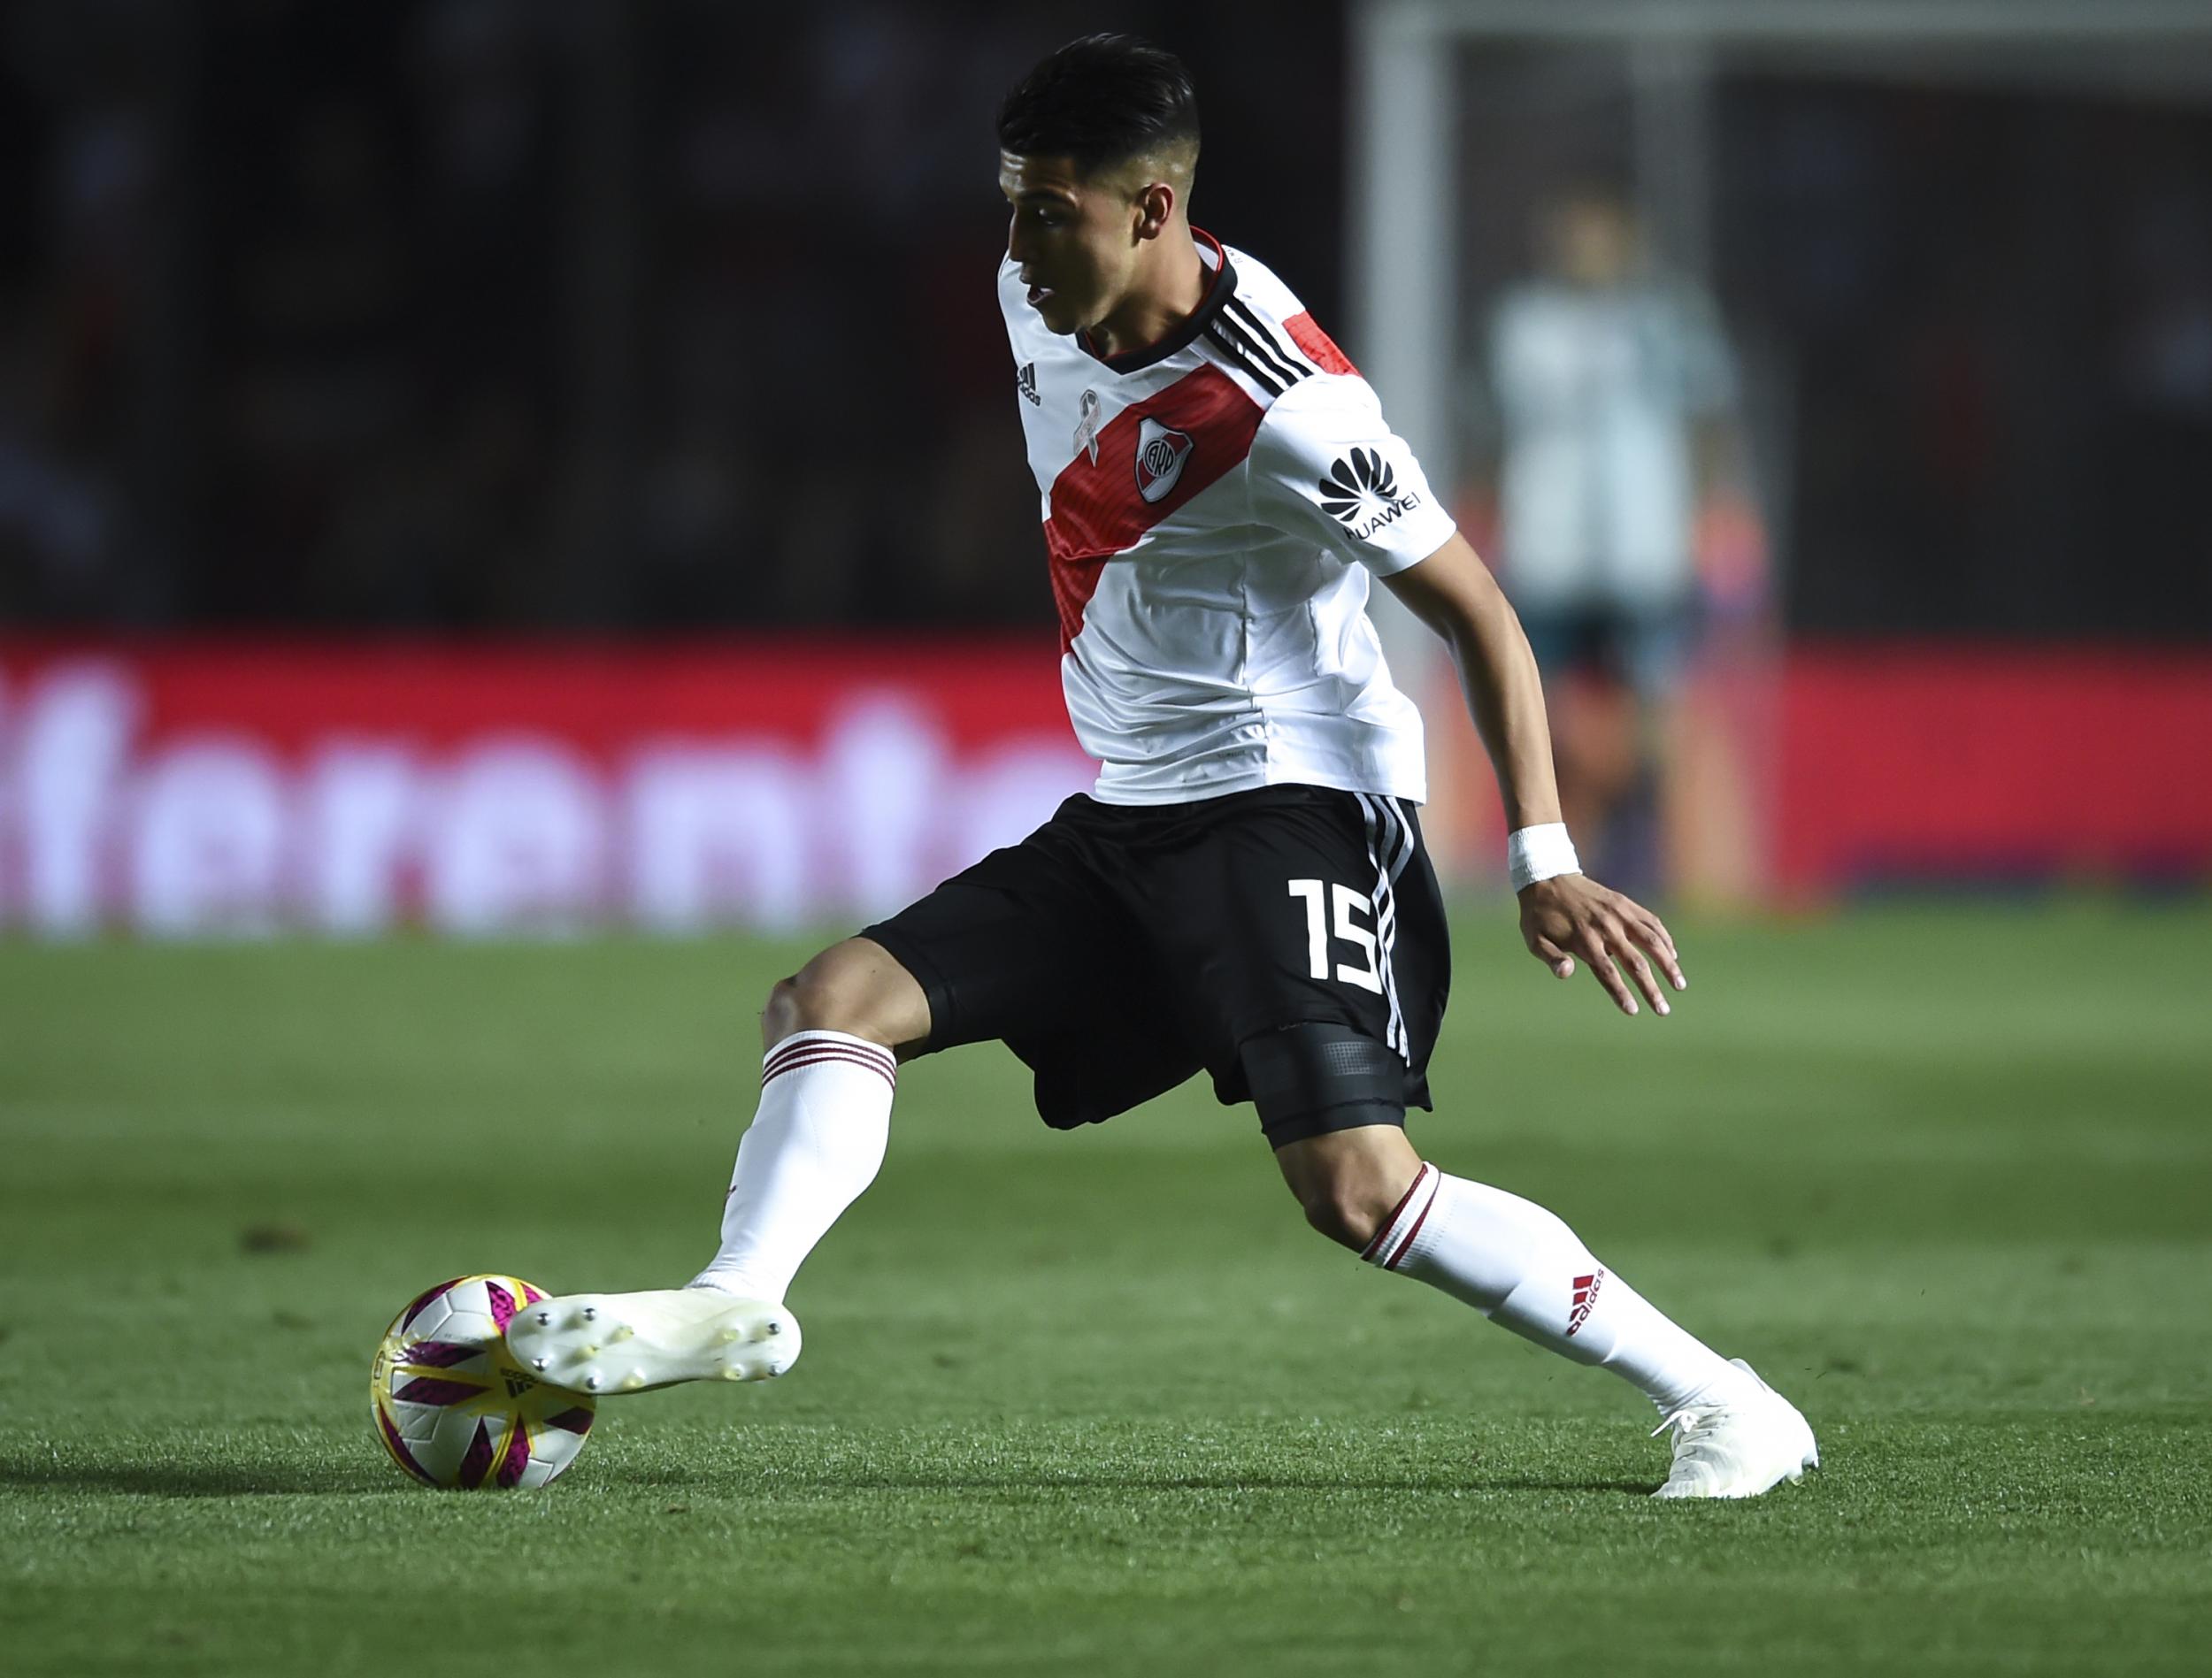 Palacios has impressed for River Plate